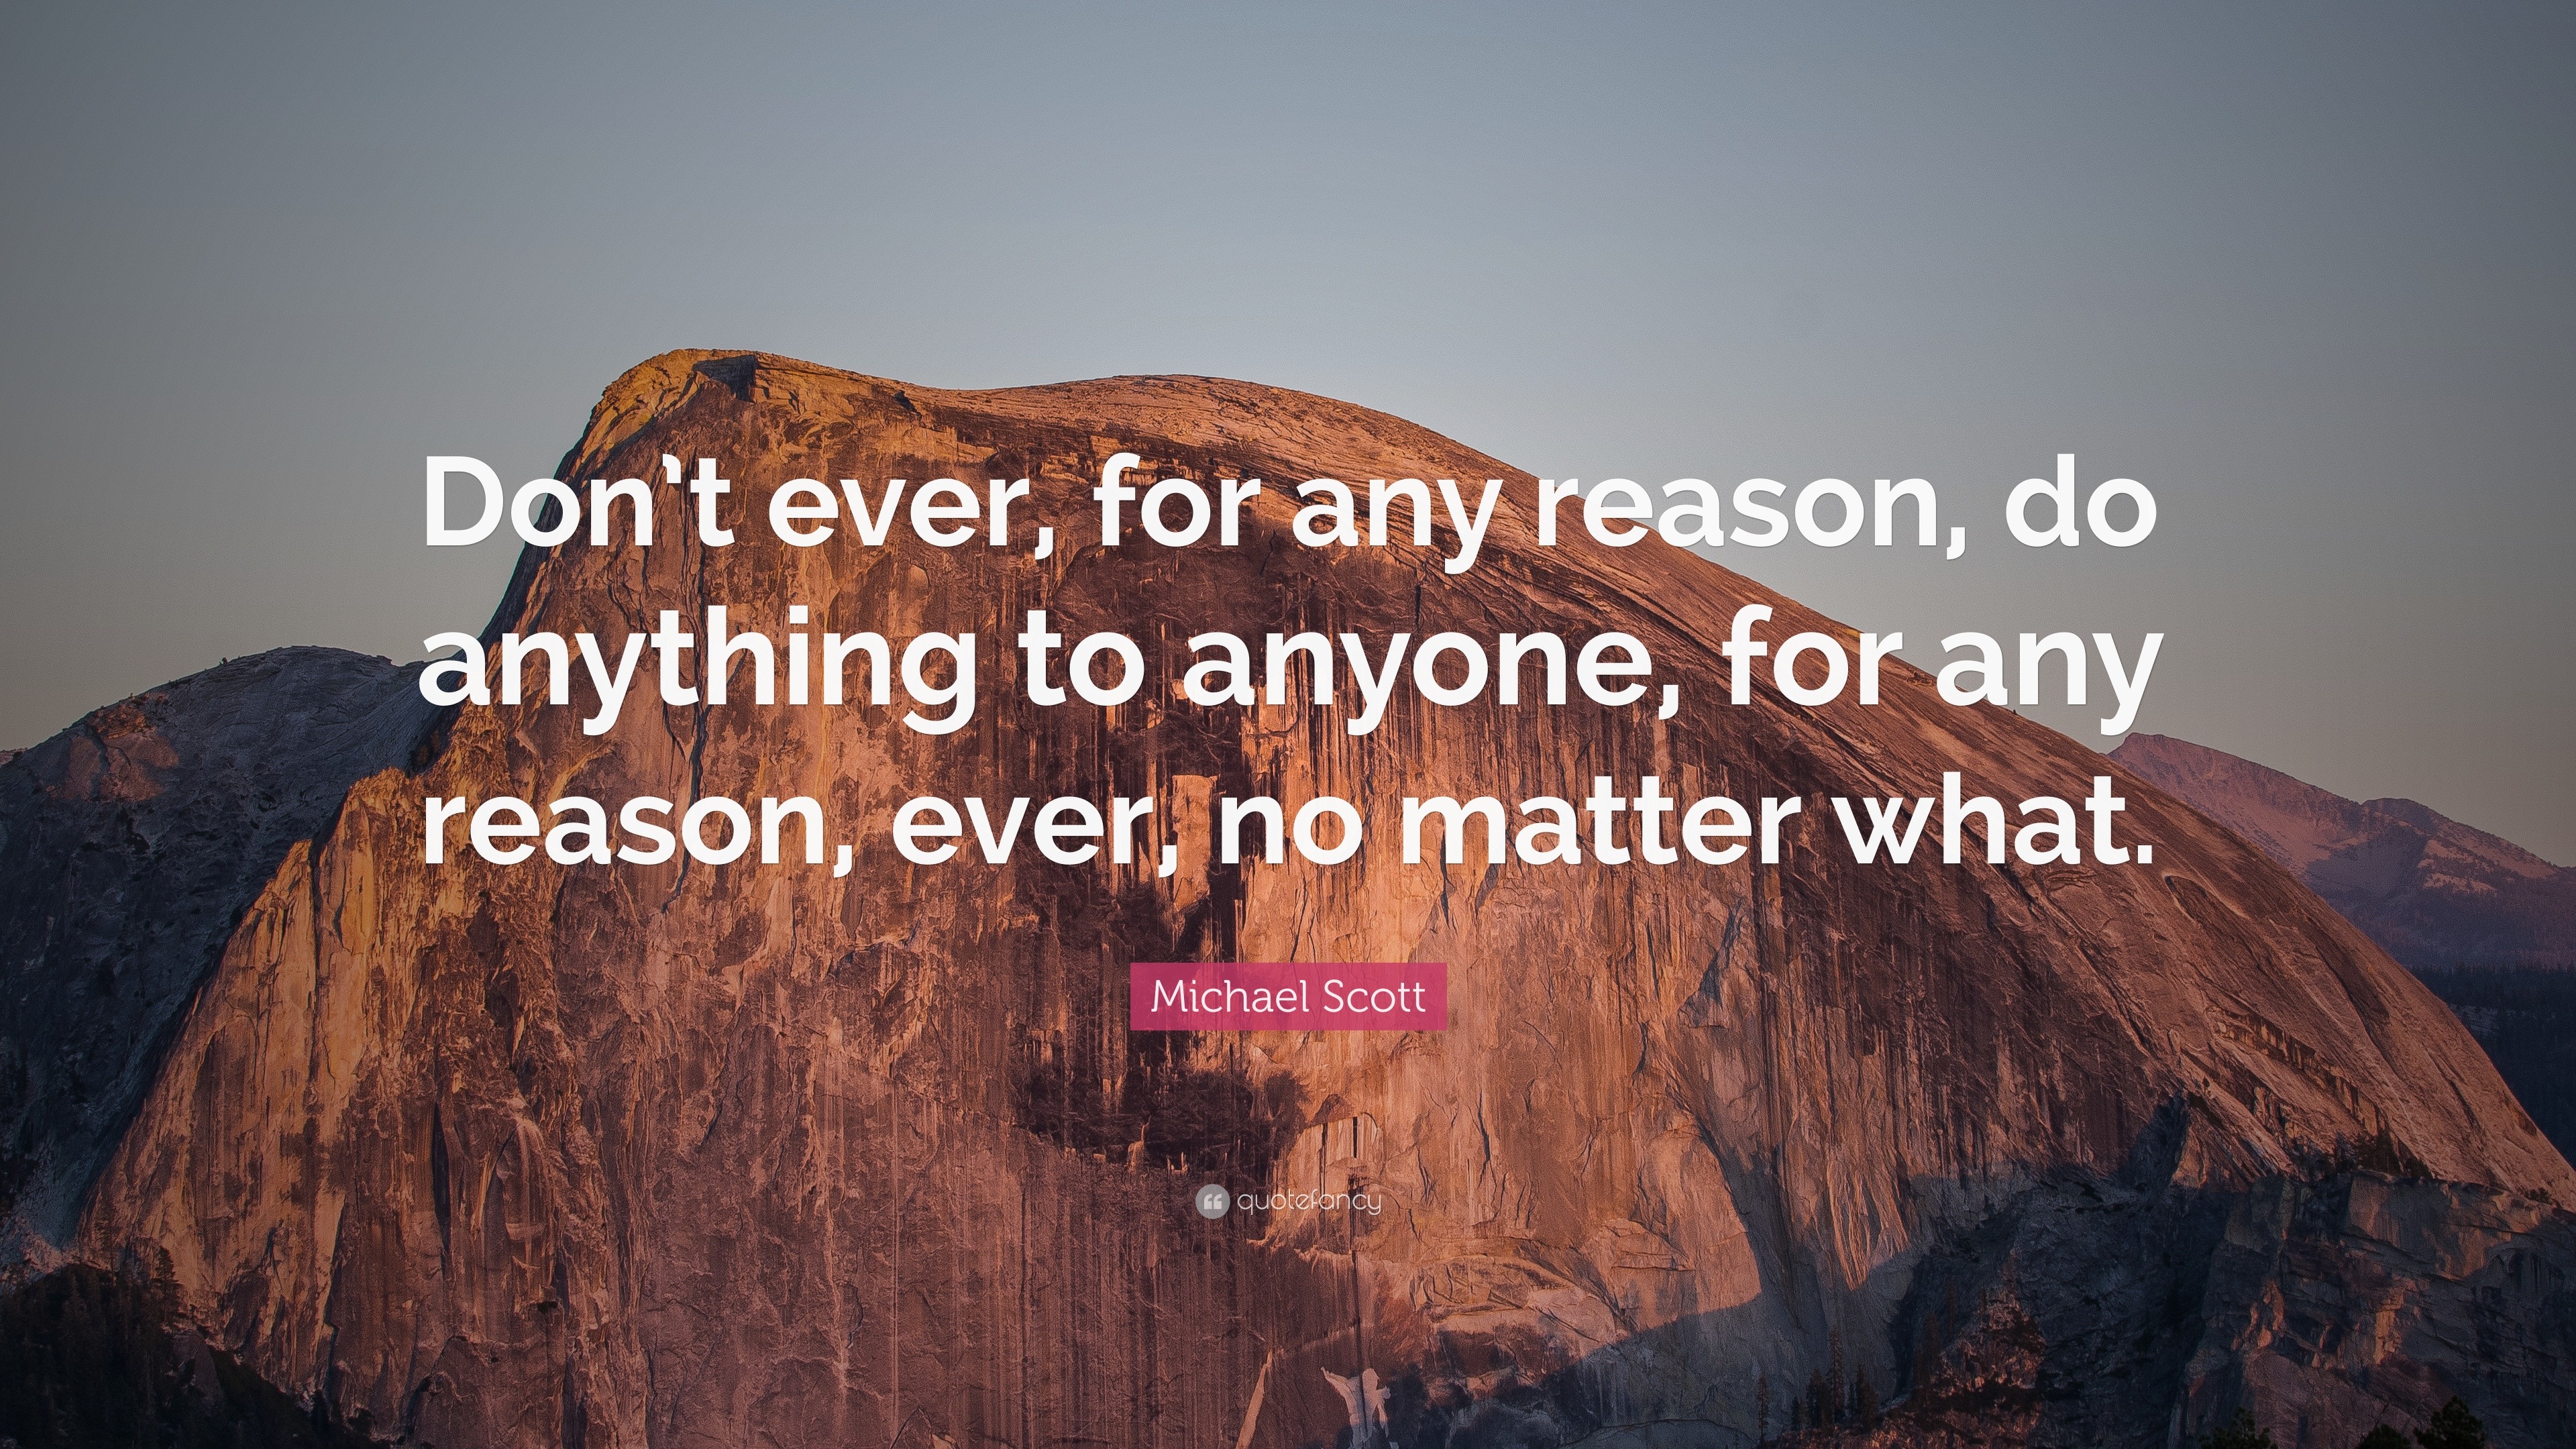 Michael Scott Quote: “Don’t ever, for any reason, do anything to anyone